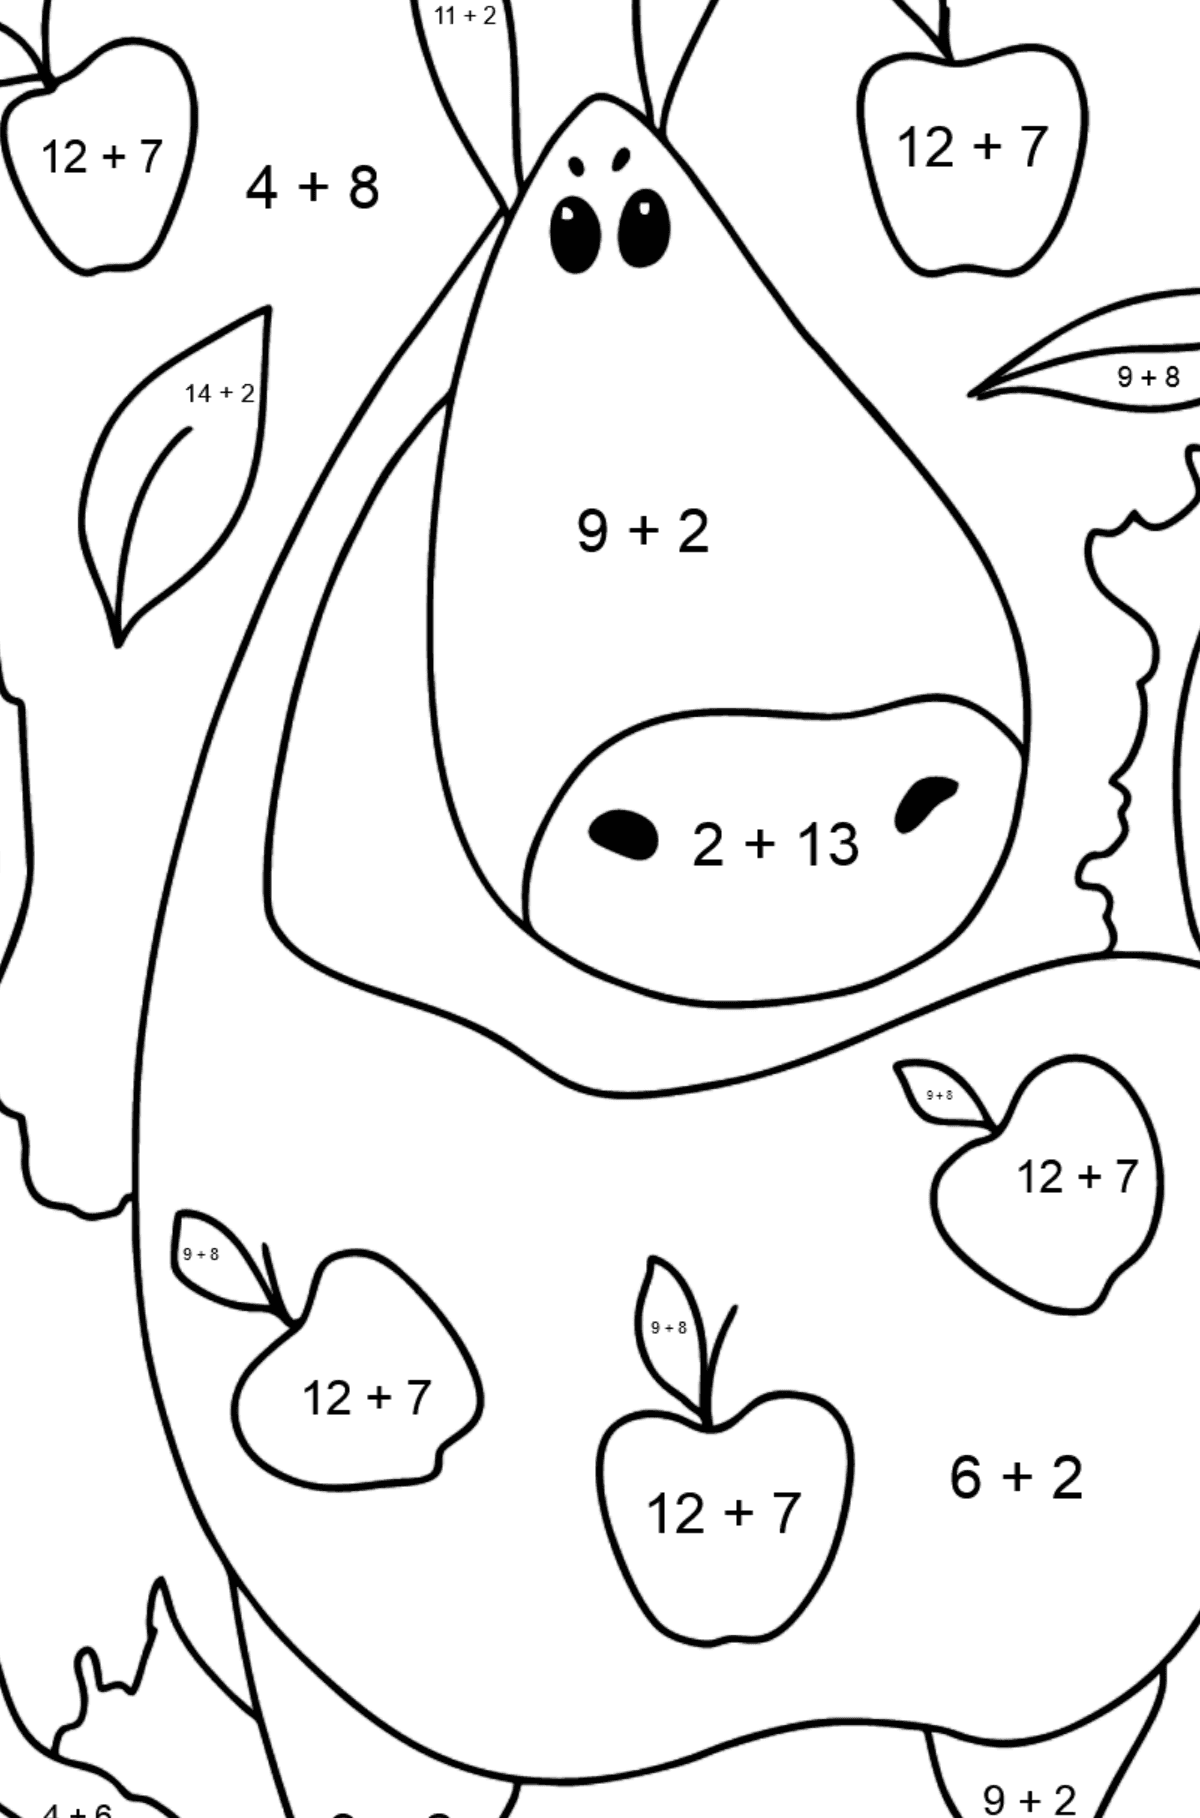 Coloring page cute horse (difficult) - Math Coloring - Addition for Kids